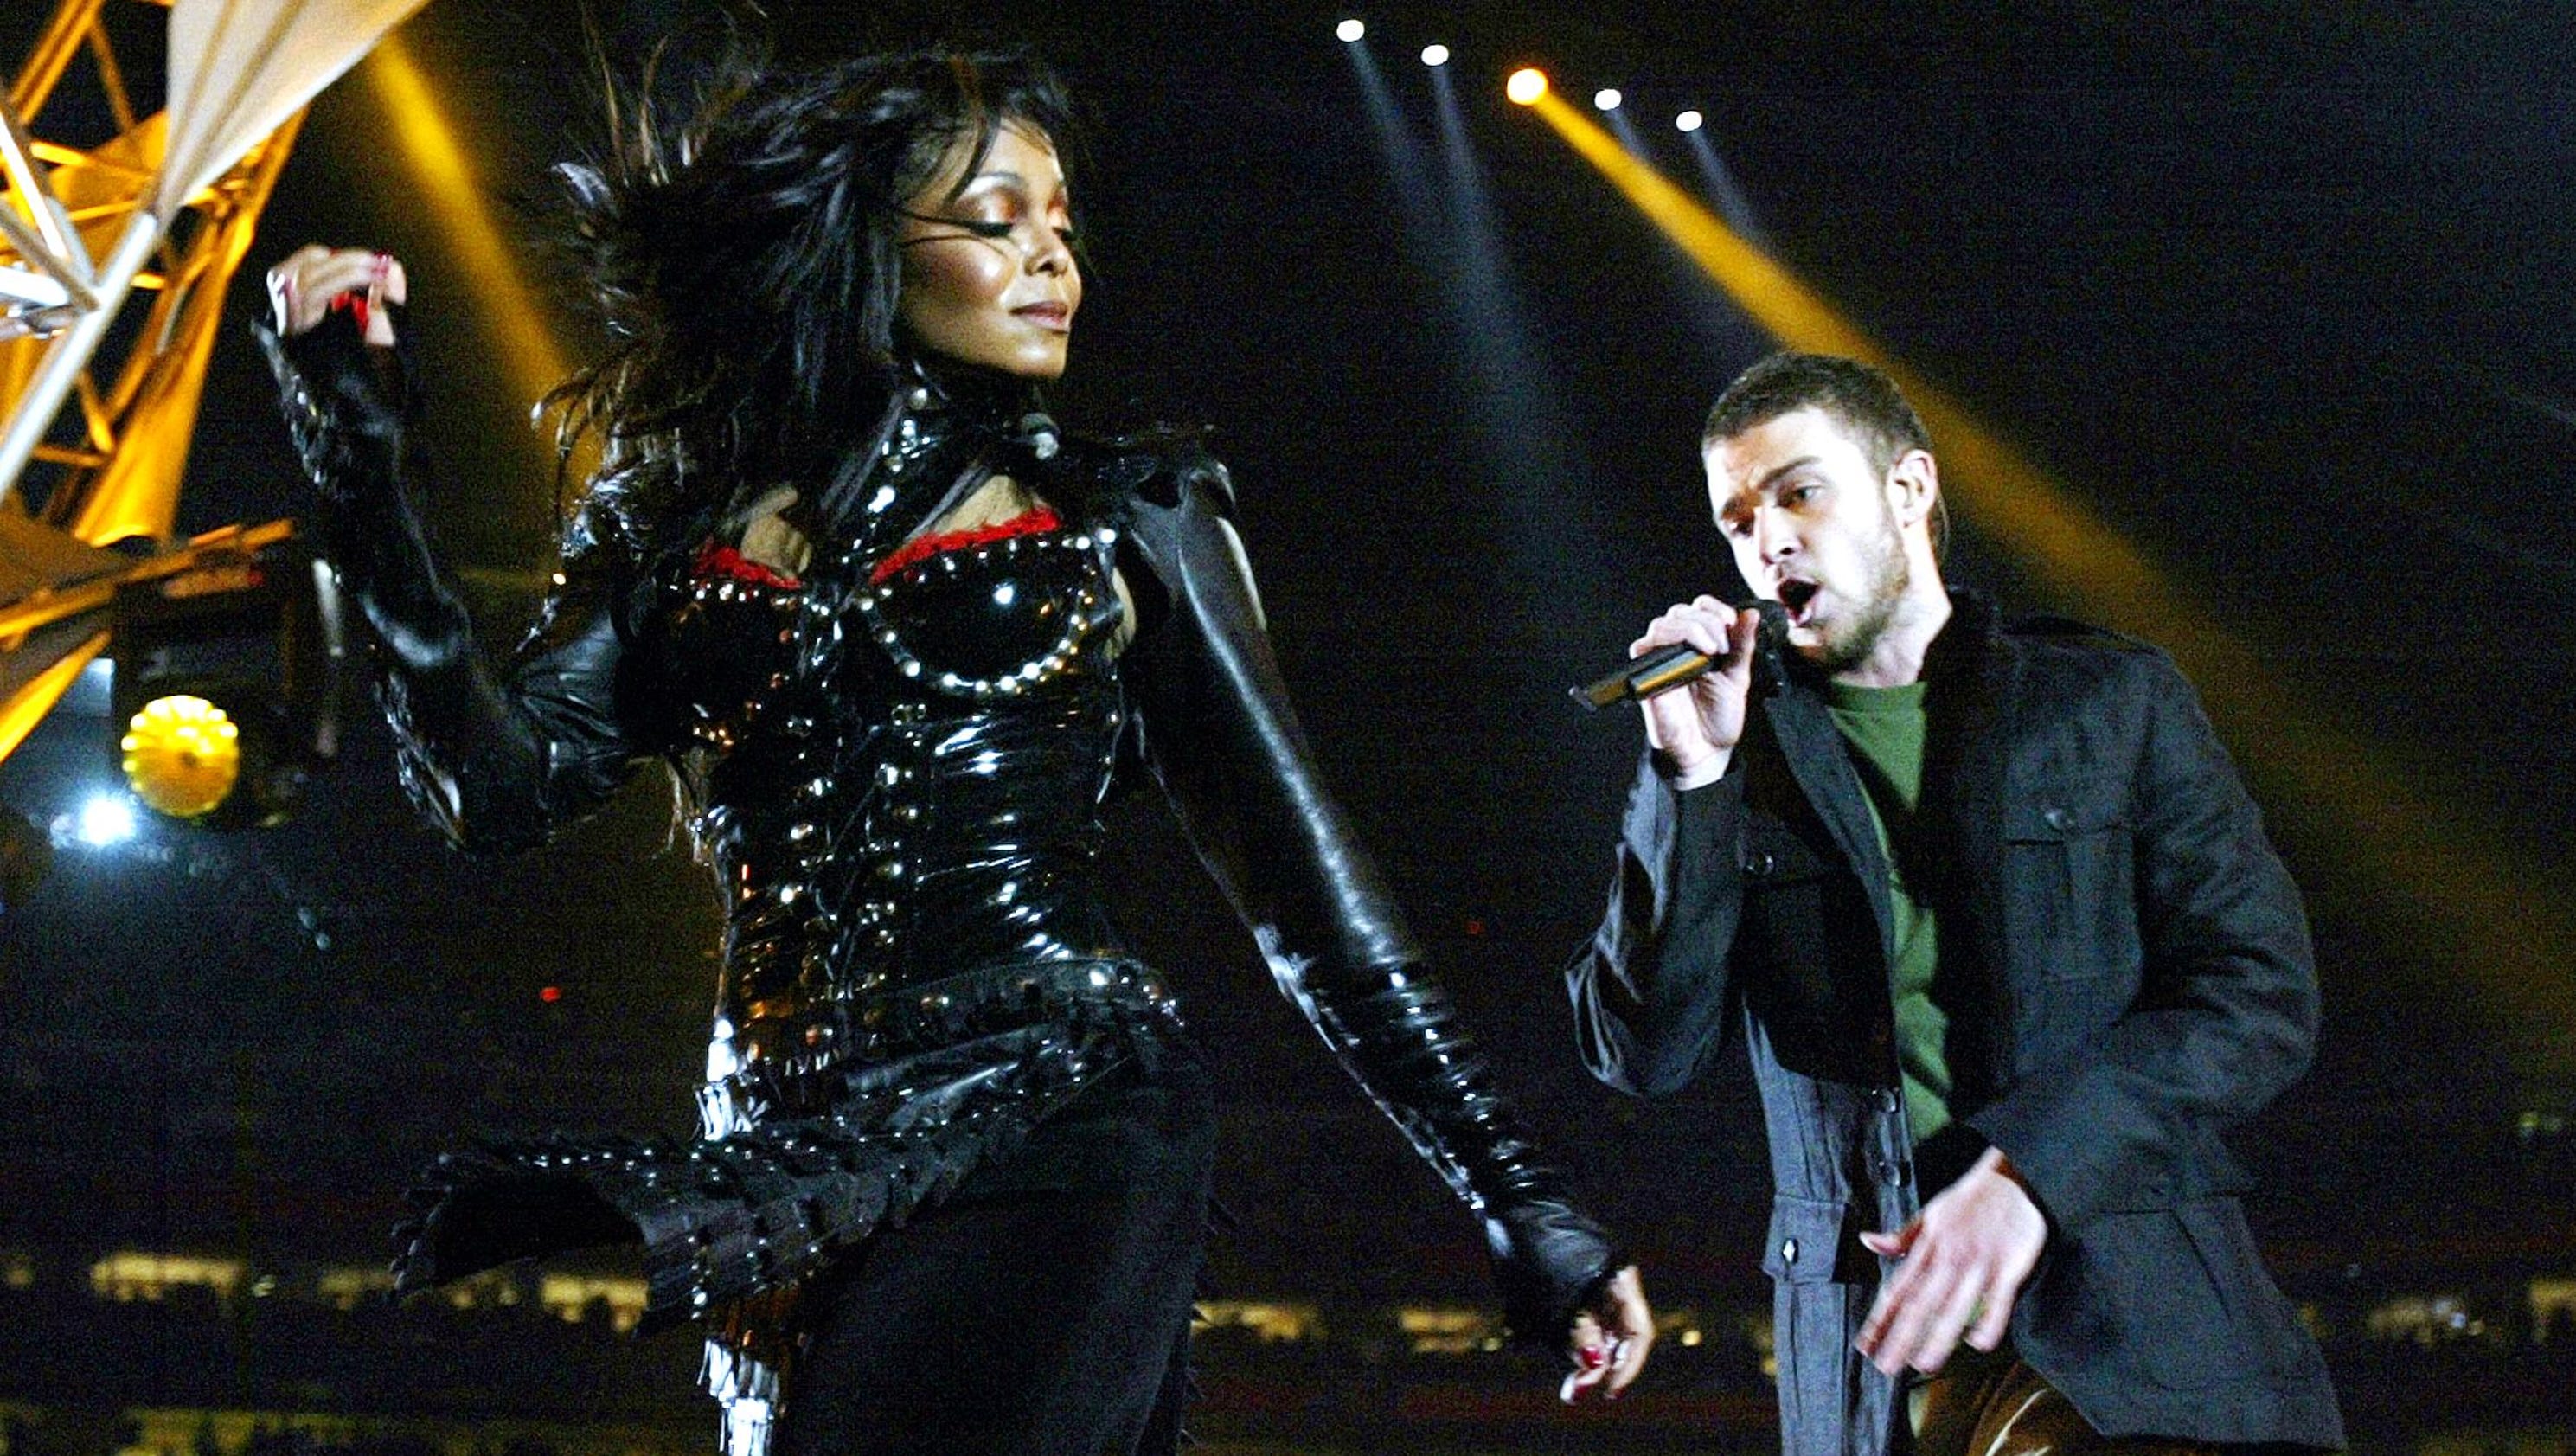 'Nipplegate' revisited: What really happened between Janet Jackson and Justin Timberlake?